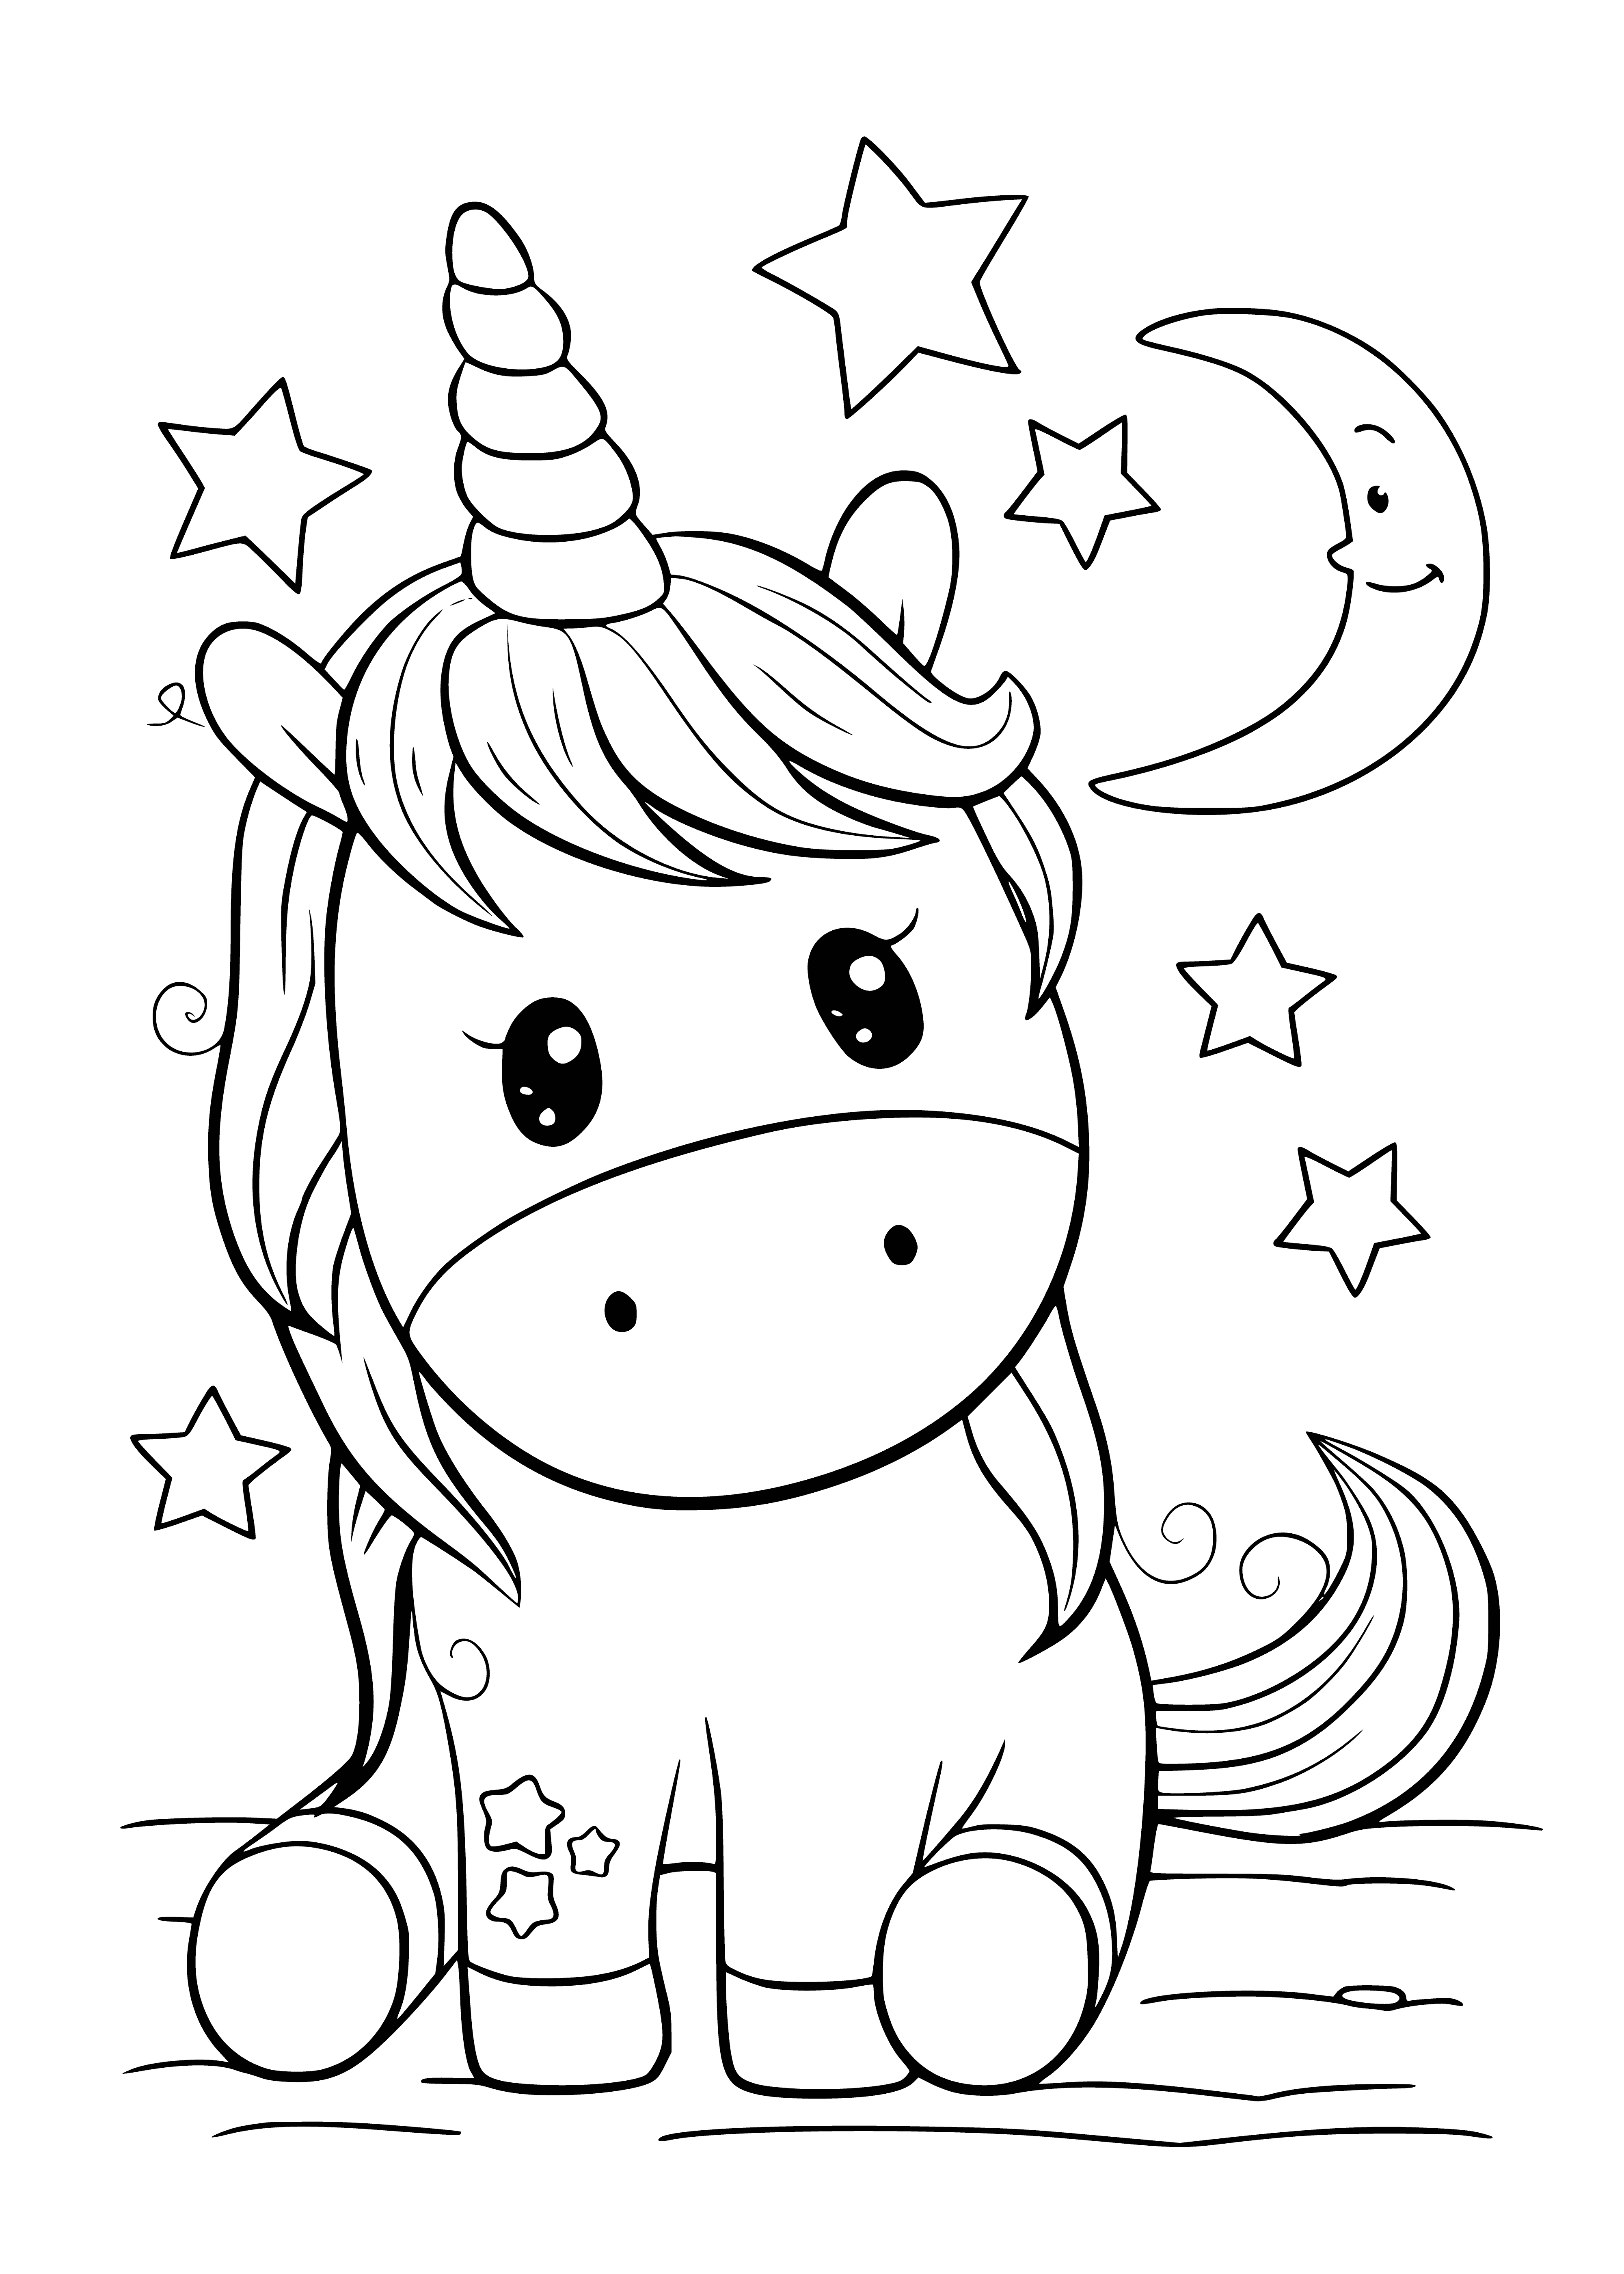 coloring page: Cute unicorn with pink mane/tail, blue w/ rainbow stripes, standing on cloud & star above head - perfect for kawaii coloring page! #unicornlove